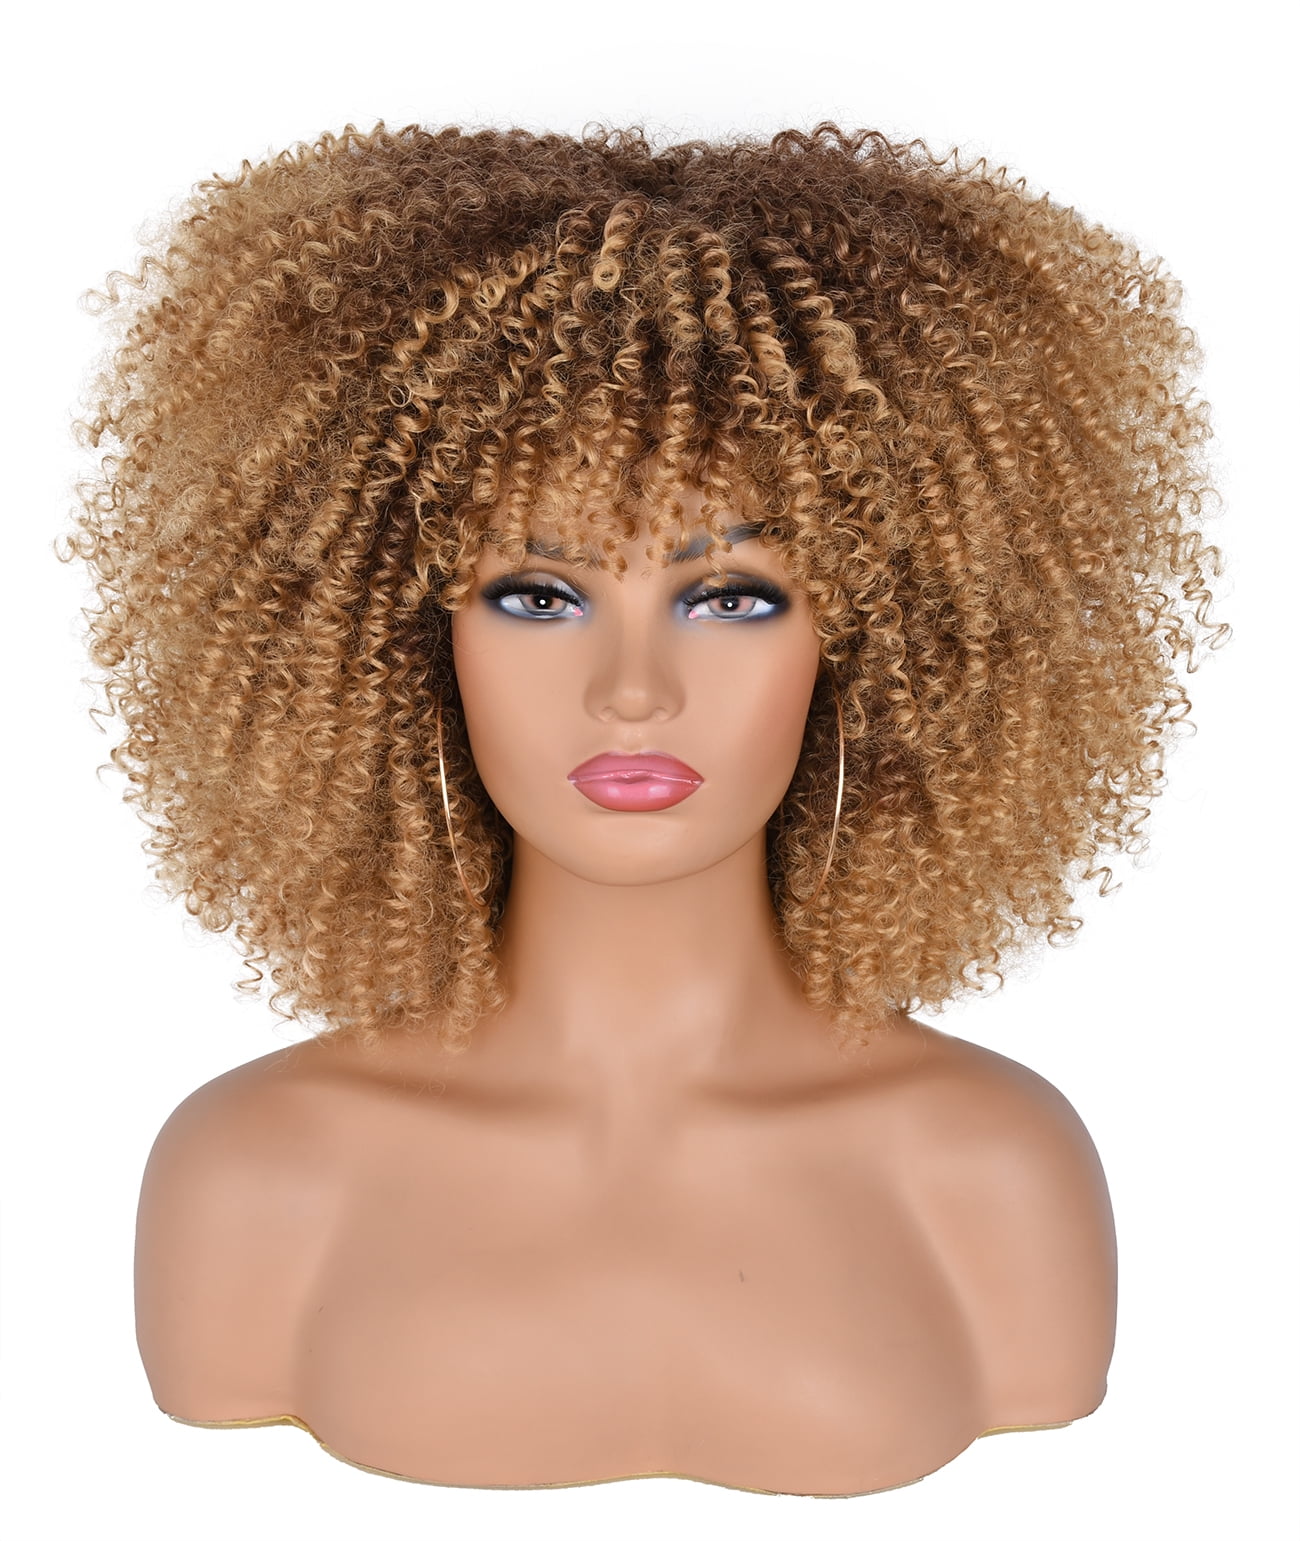 ANNISOUL Afro Curly Wigs for Black Women with Bangs Synthetic Short ...